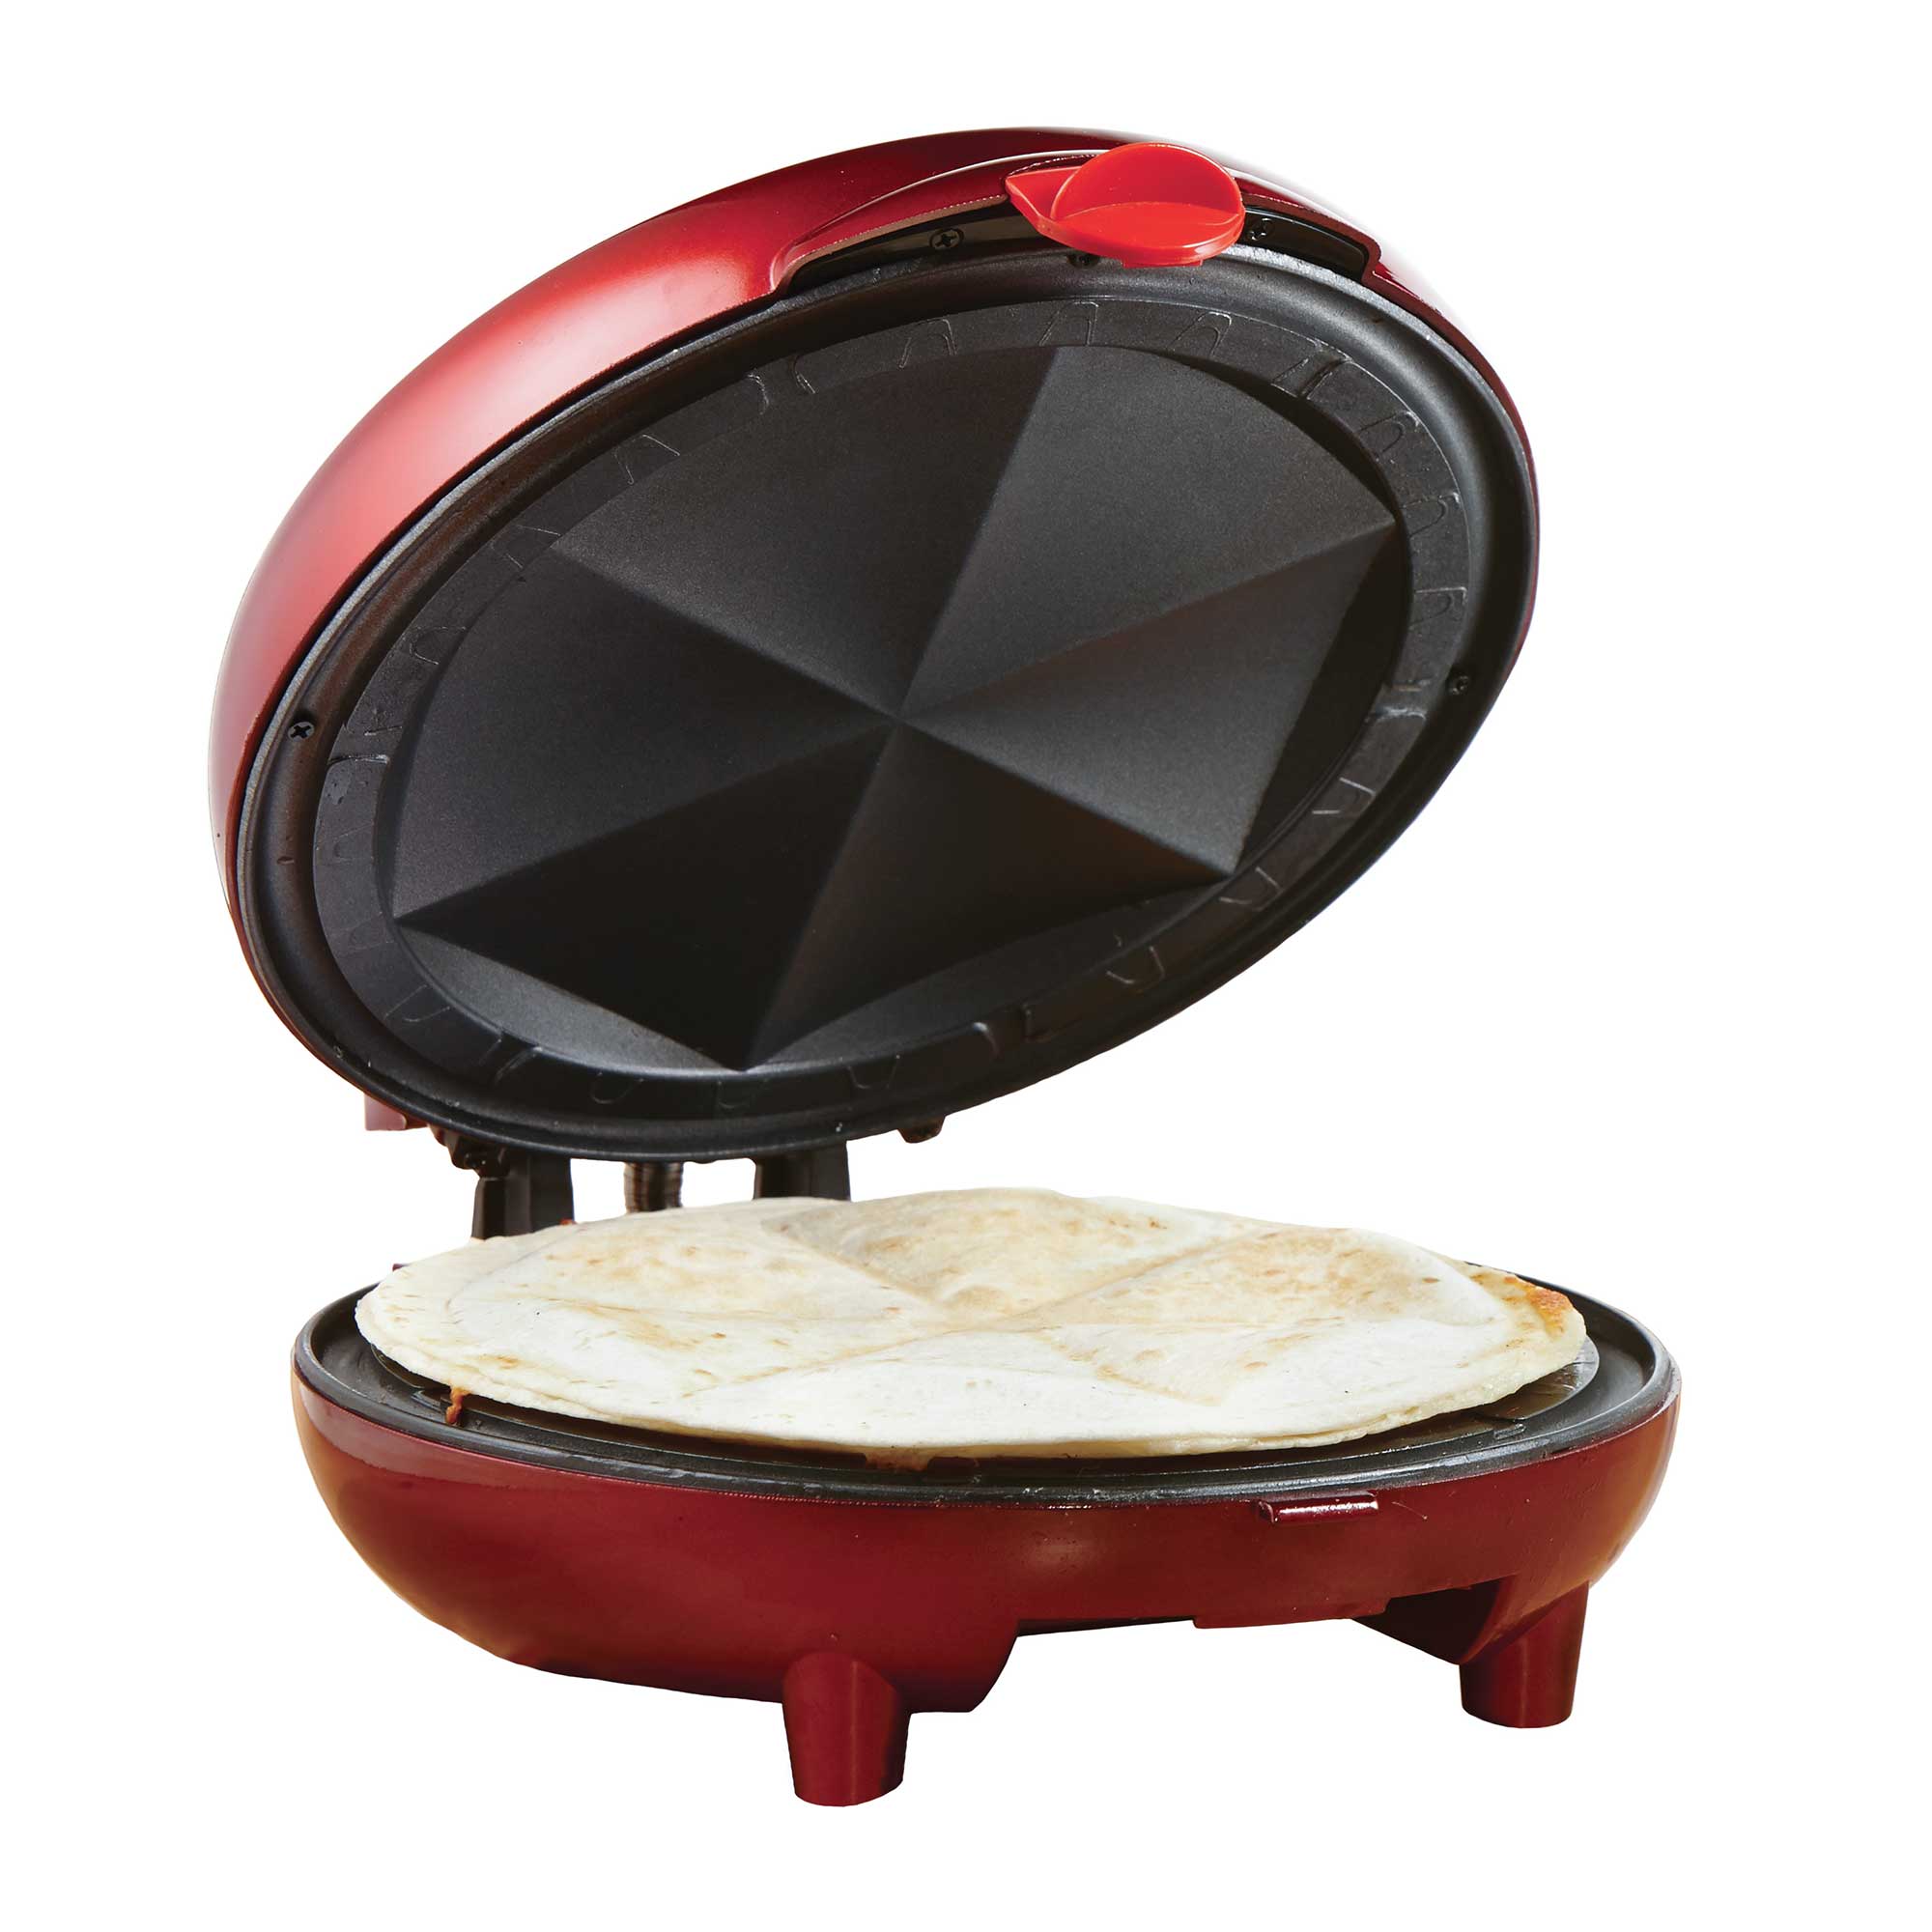 Brentwood TS-120 8-Inch Quesadilla Maker, Red